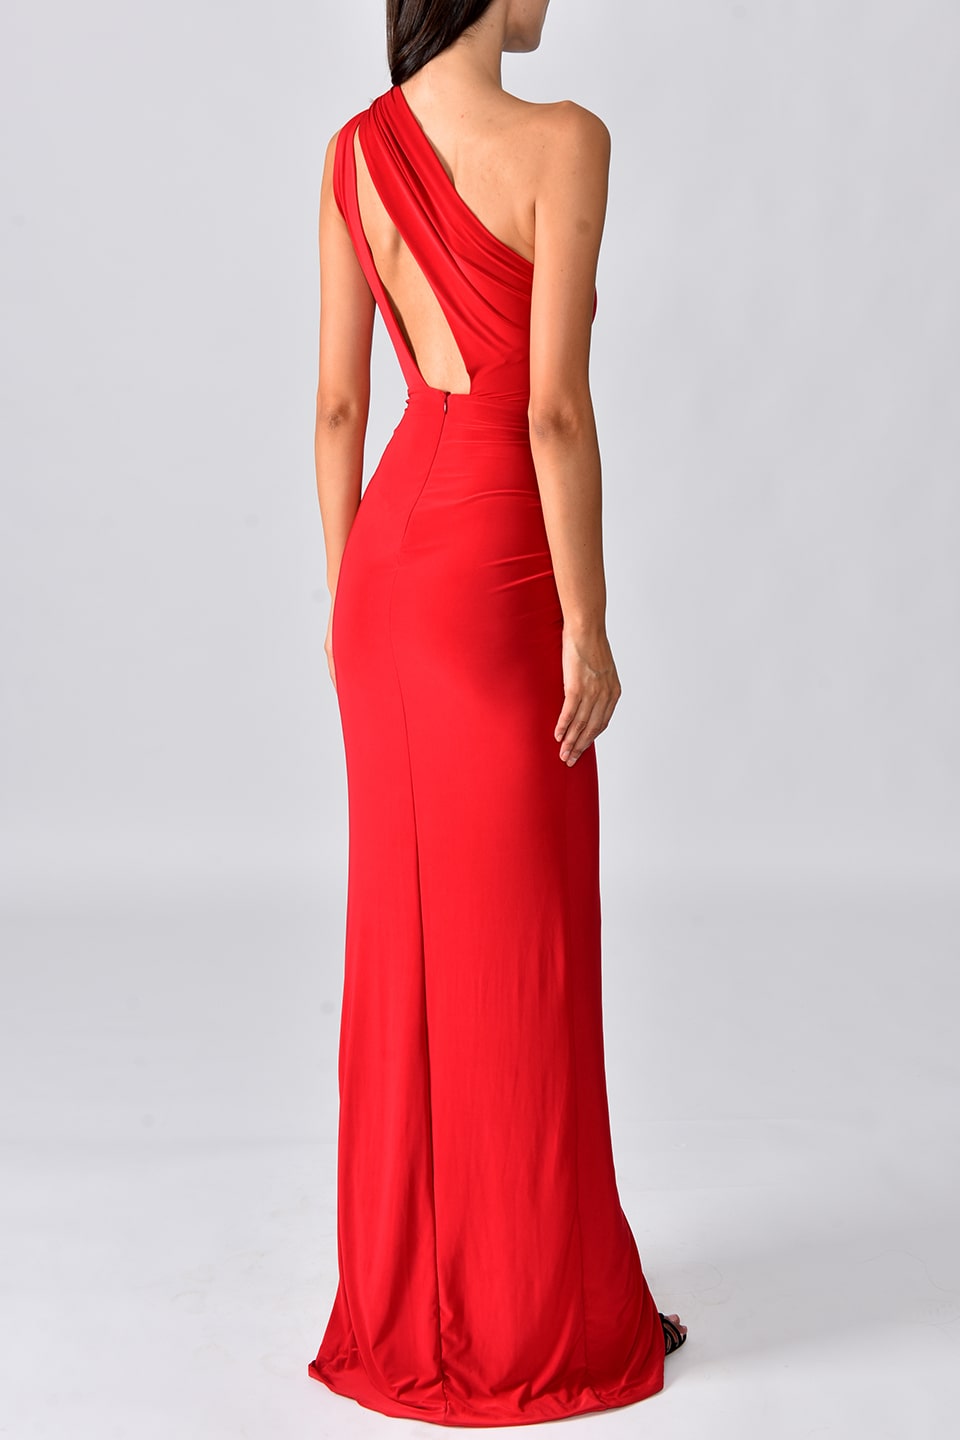 Thumbnail for Product gallery 2, Model wearing one shoulder red maxi dress from stylist Hamel, posing from behind